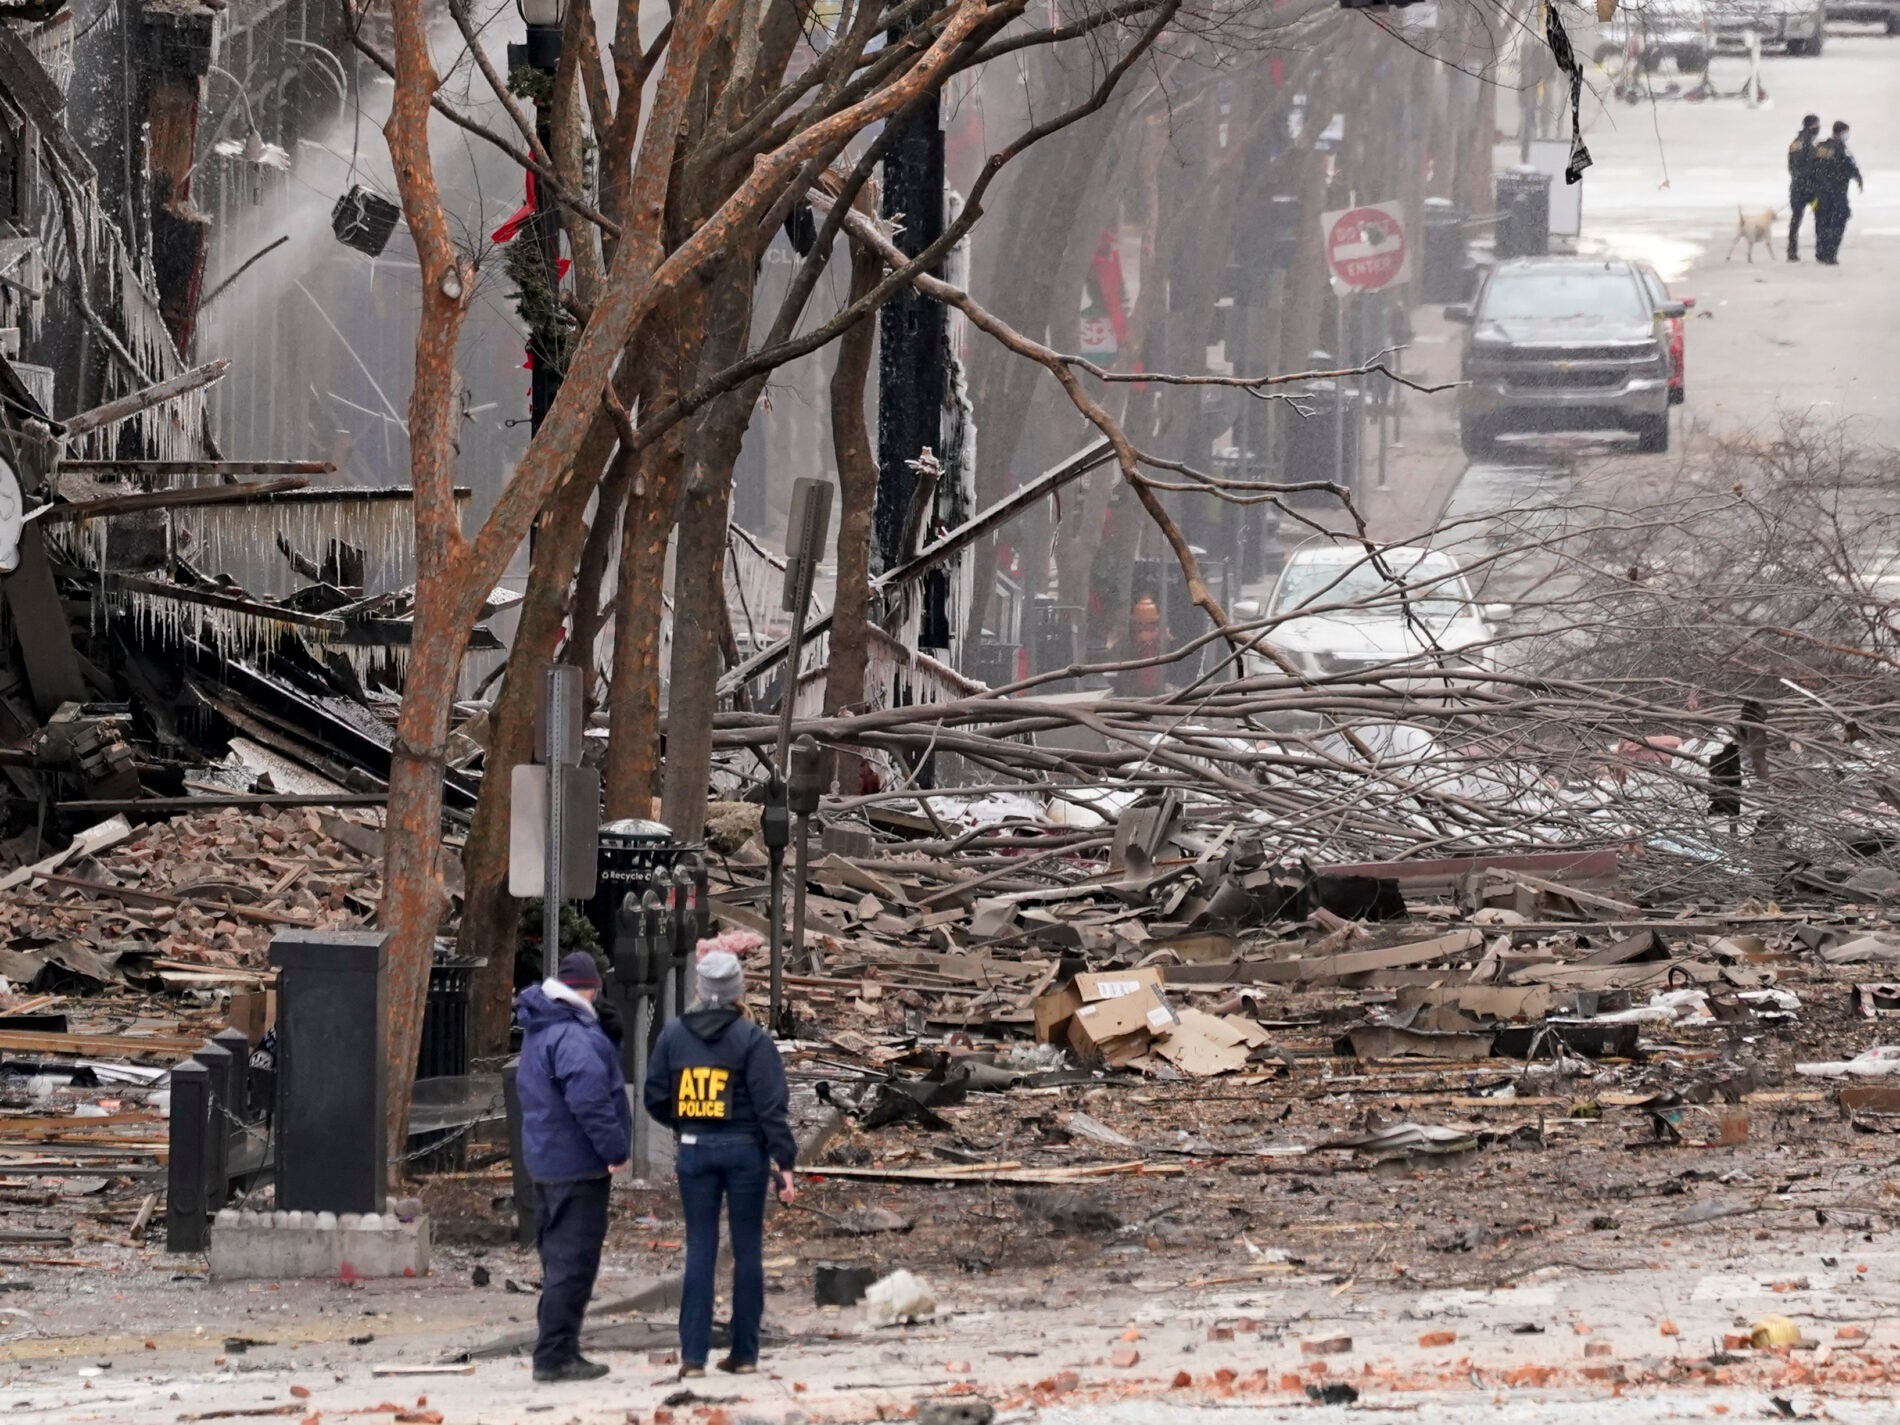 Emergency personnel work near the scene of an explosion in downtown Nashville